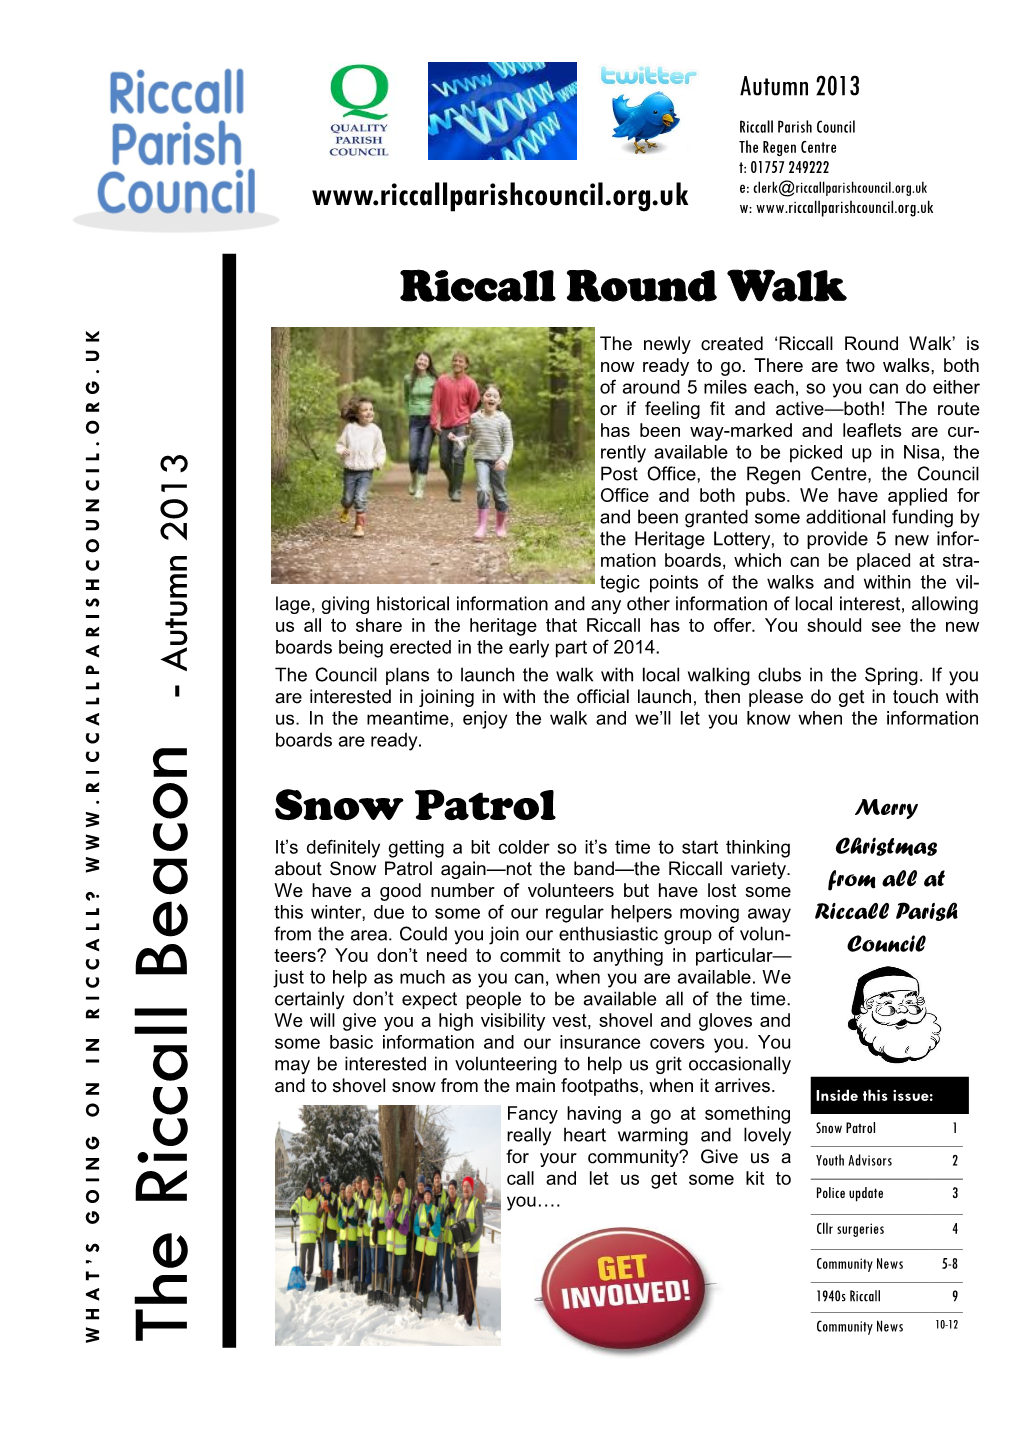 The Riccall Beacon Riccall the Beacon WHAT’S GOING on in R AUTUMNN 2013 Page 2 Youth Advisors for Riccall